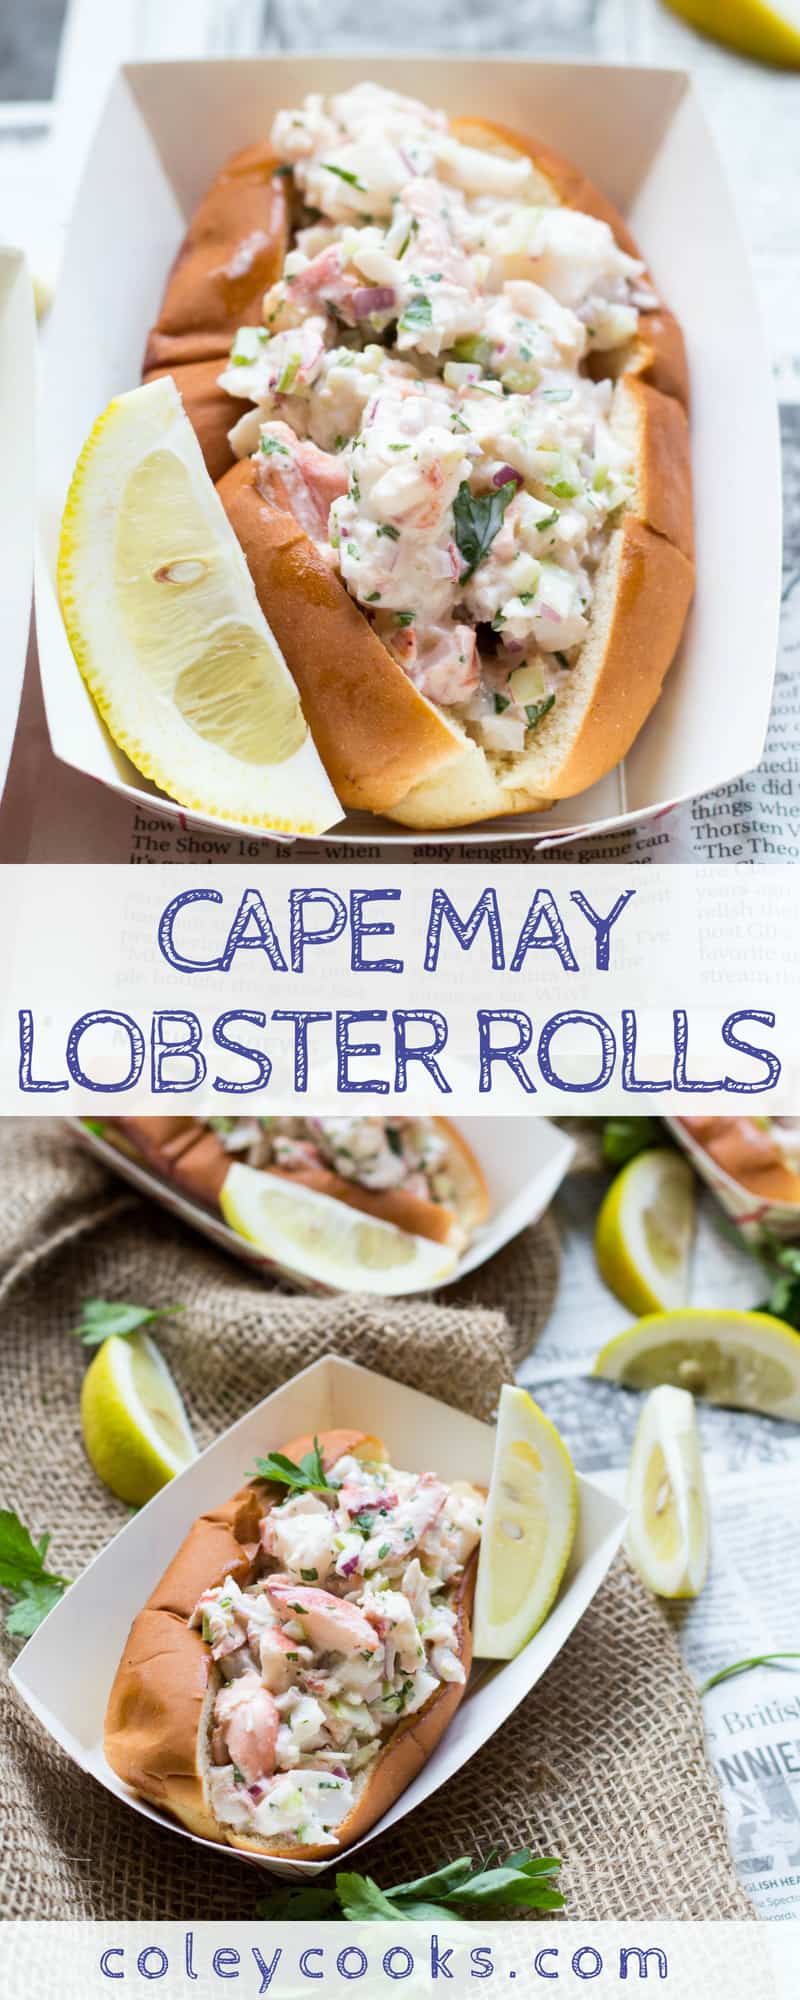 CAPE MAY LOBSTER ROLLS | This easy summer recipe for lobster rolls is my family's favorite way to prepare them! Lightly dressed big chunks of lobster stuffed inside a buttery top split bun. #recipe #lobster #capemaynj #summer | ColeyCooks.com